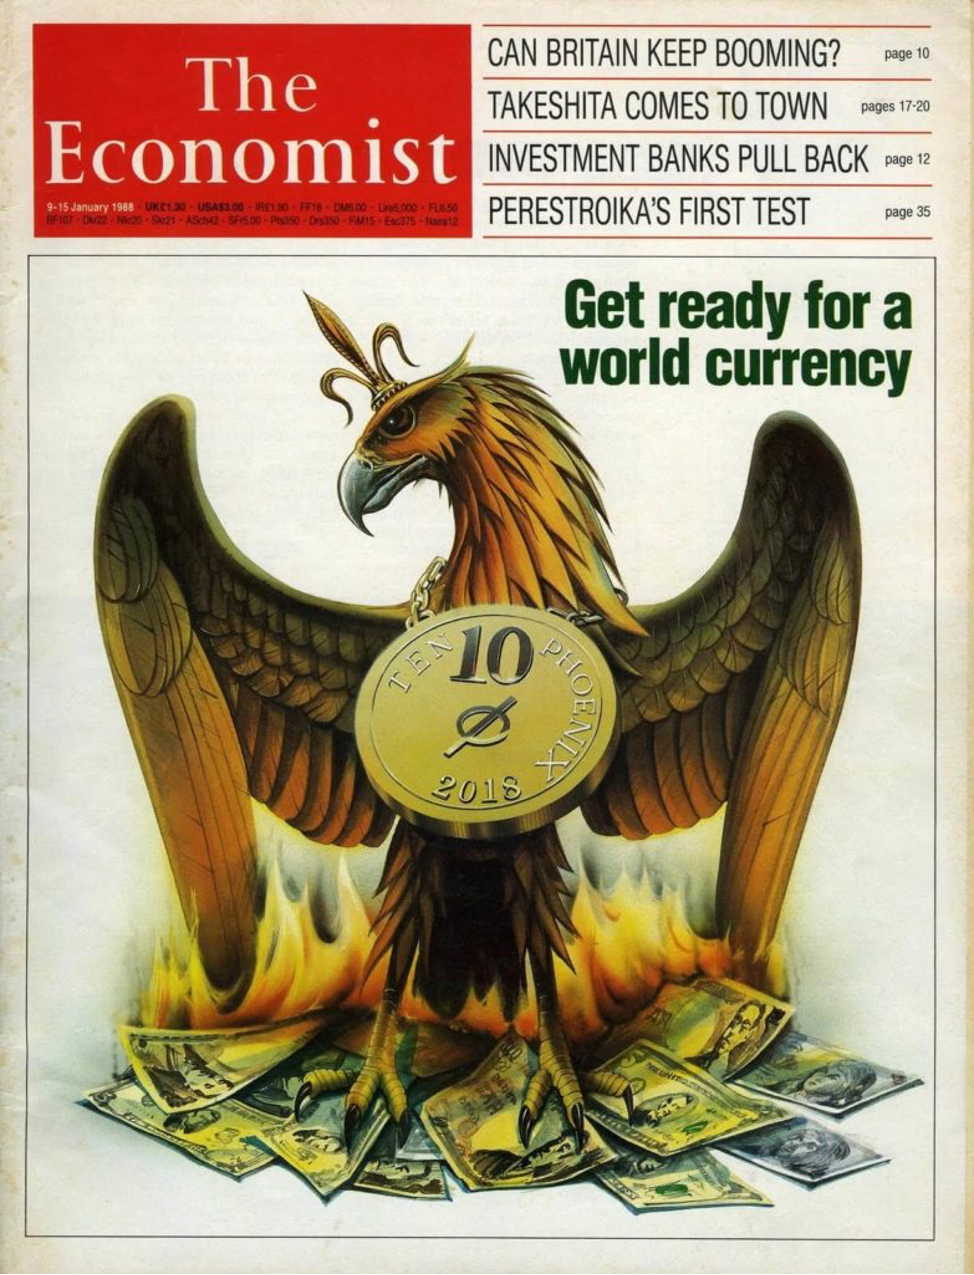 Was the one world currency predicted in 1988?